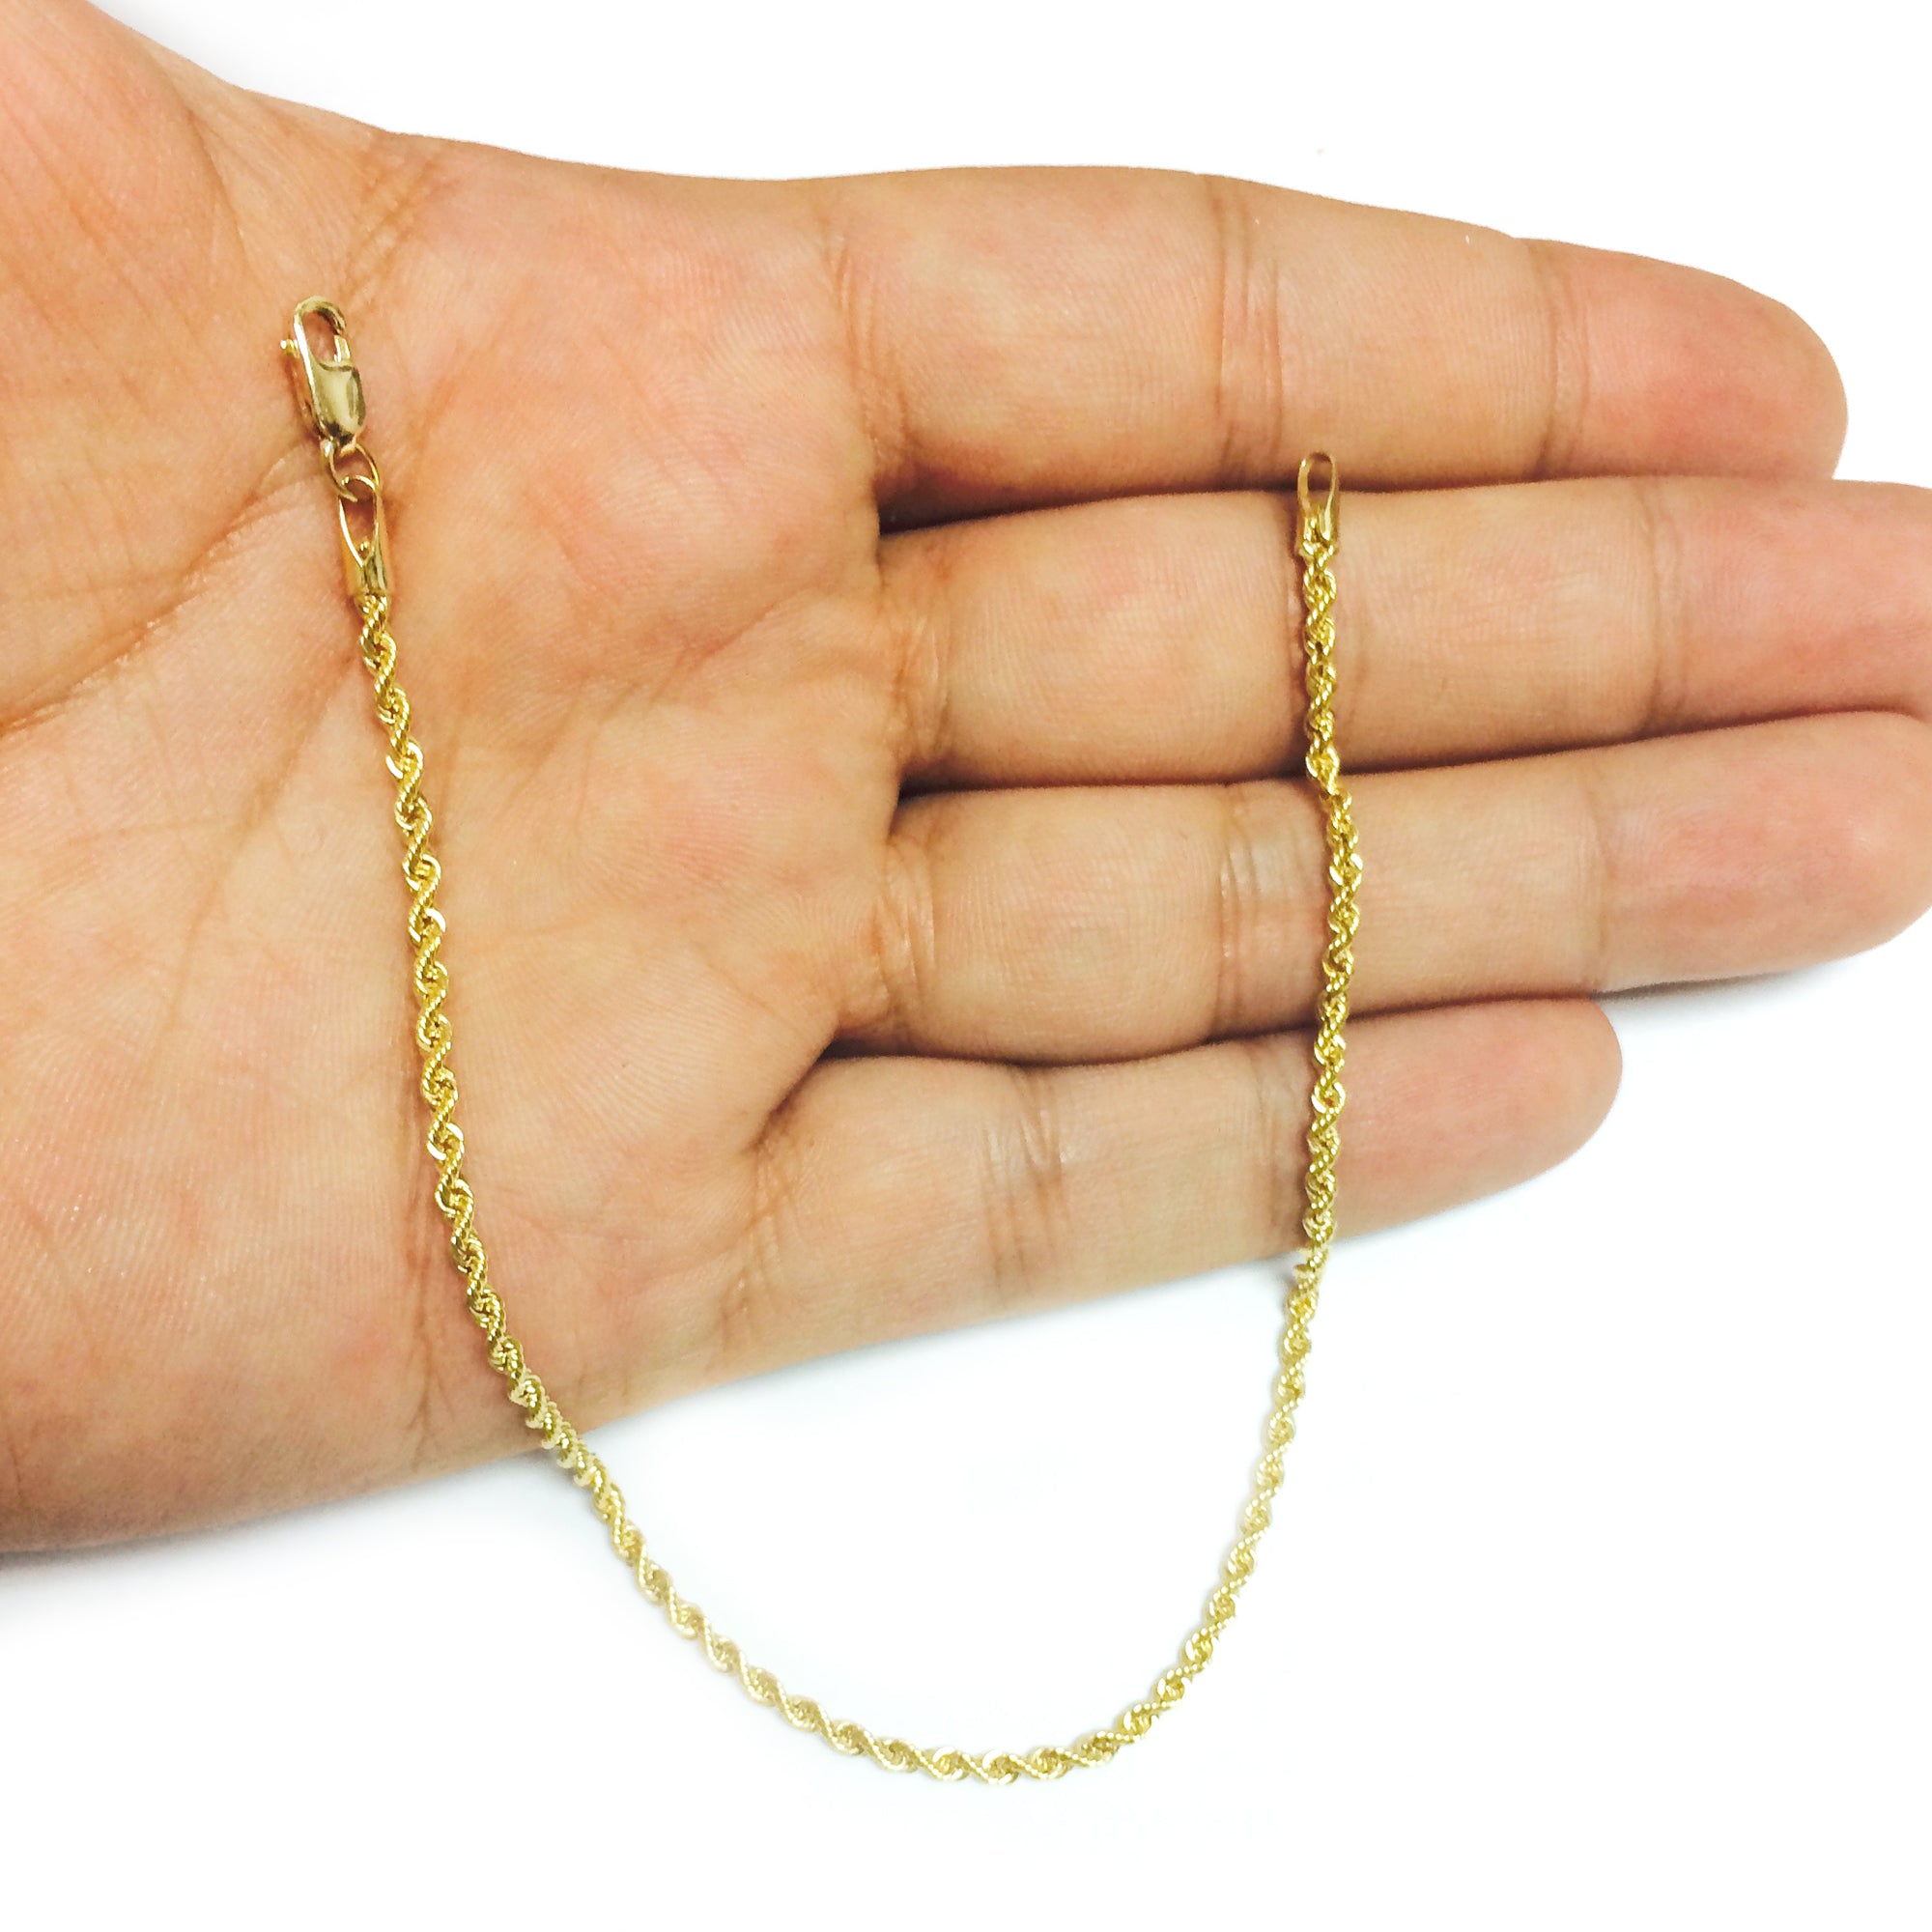 14K Yellow Gold Filled Solid Rope Chain Bracelet, 2.1mm, 8.5" fine designer jewelry for men and women